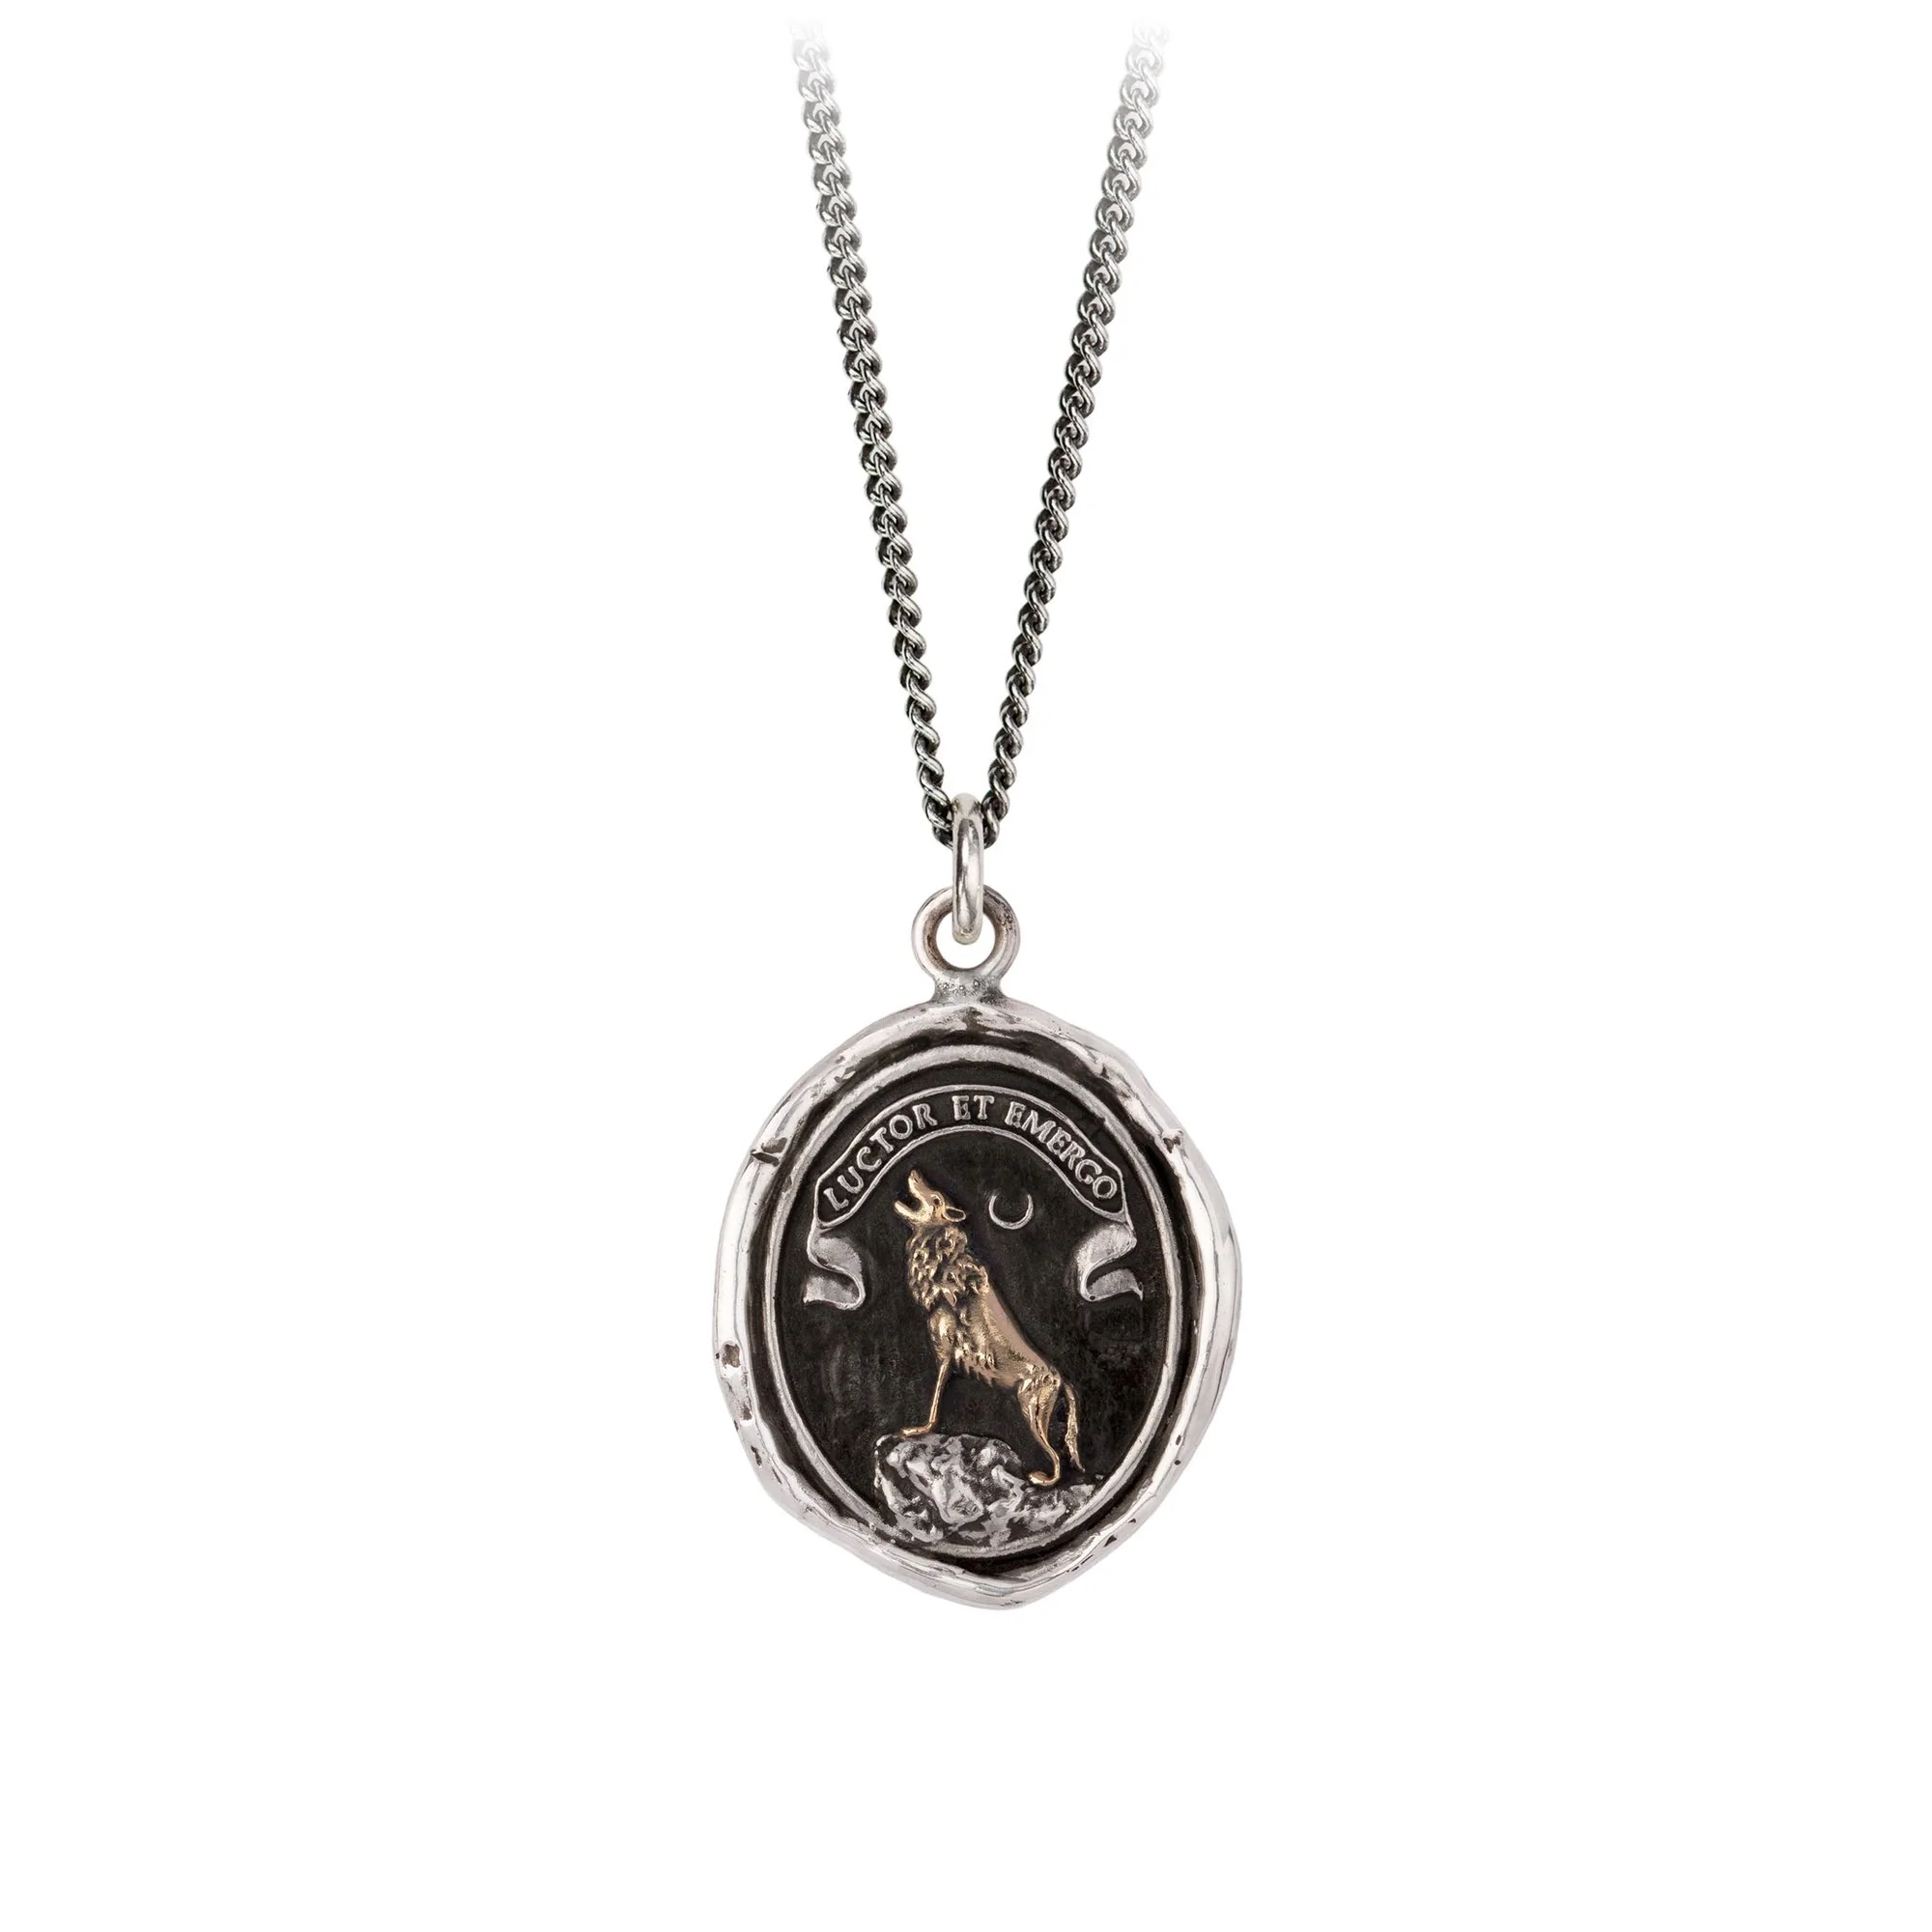 Struggle And Emerge 14k Gold On Silver Talisman | Magpie Jewellery